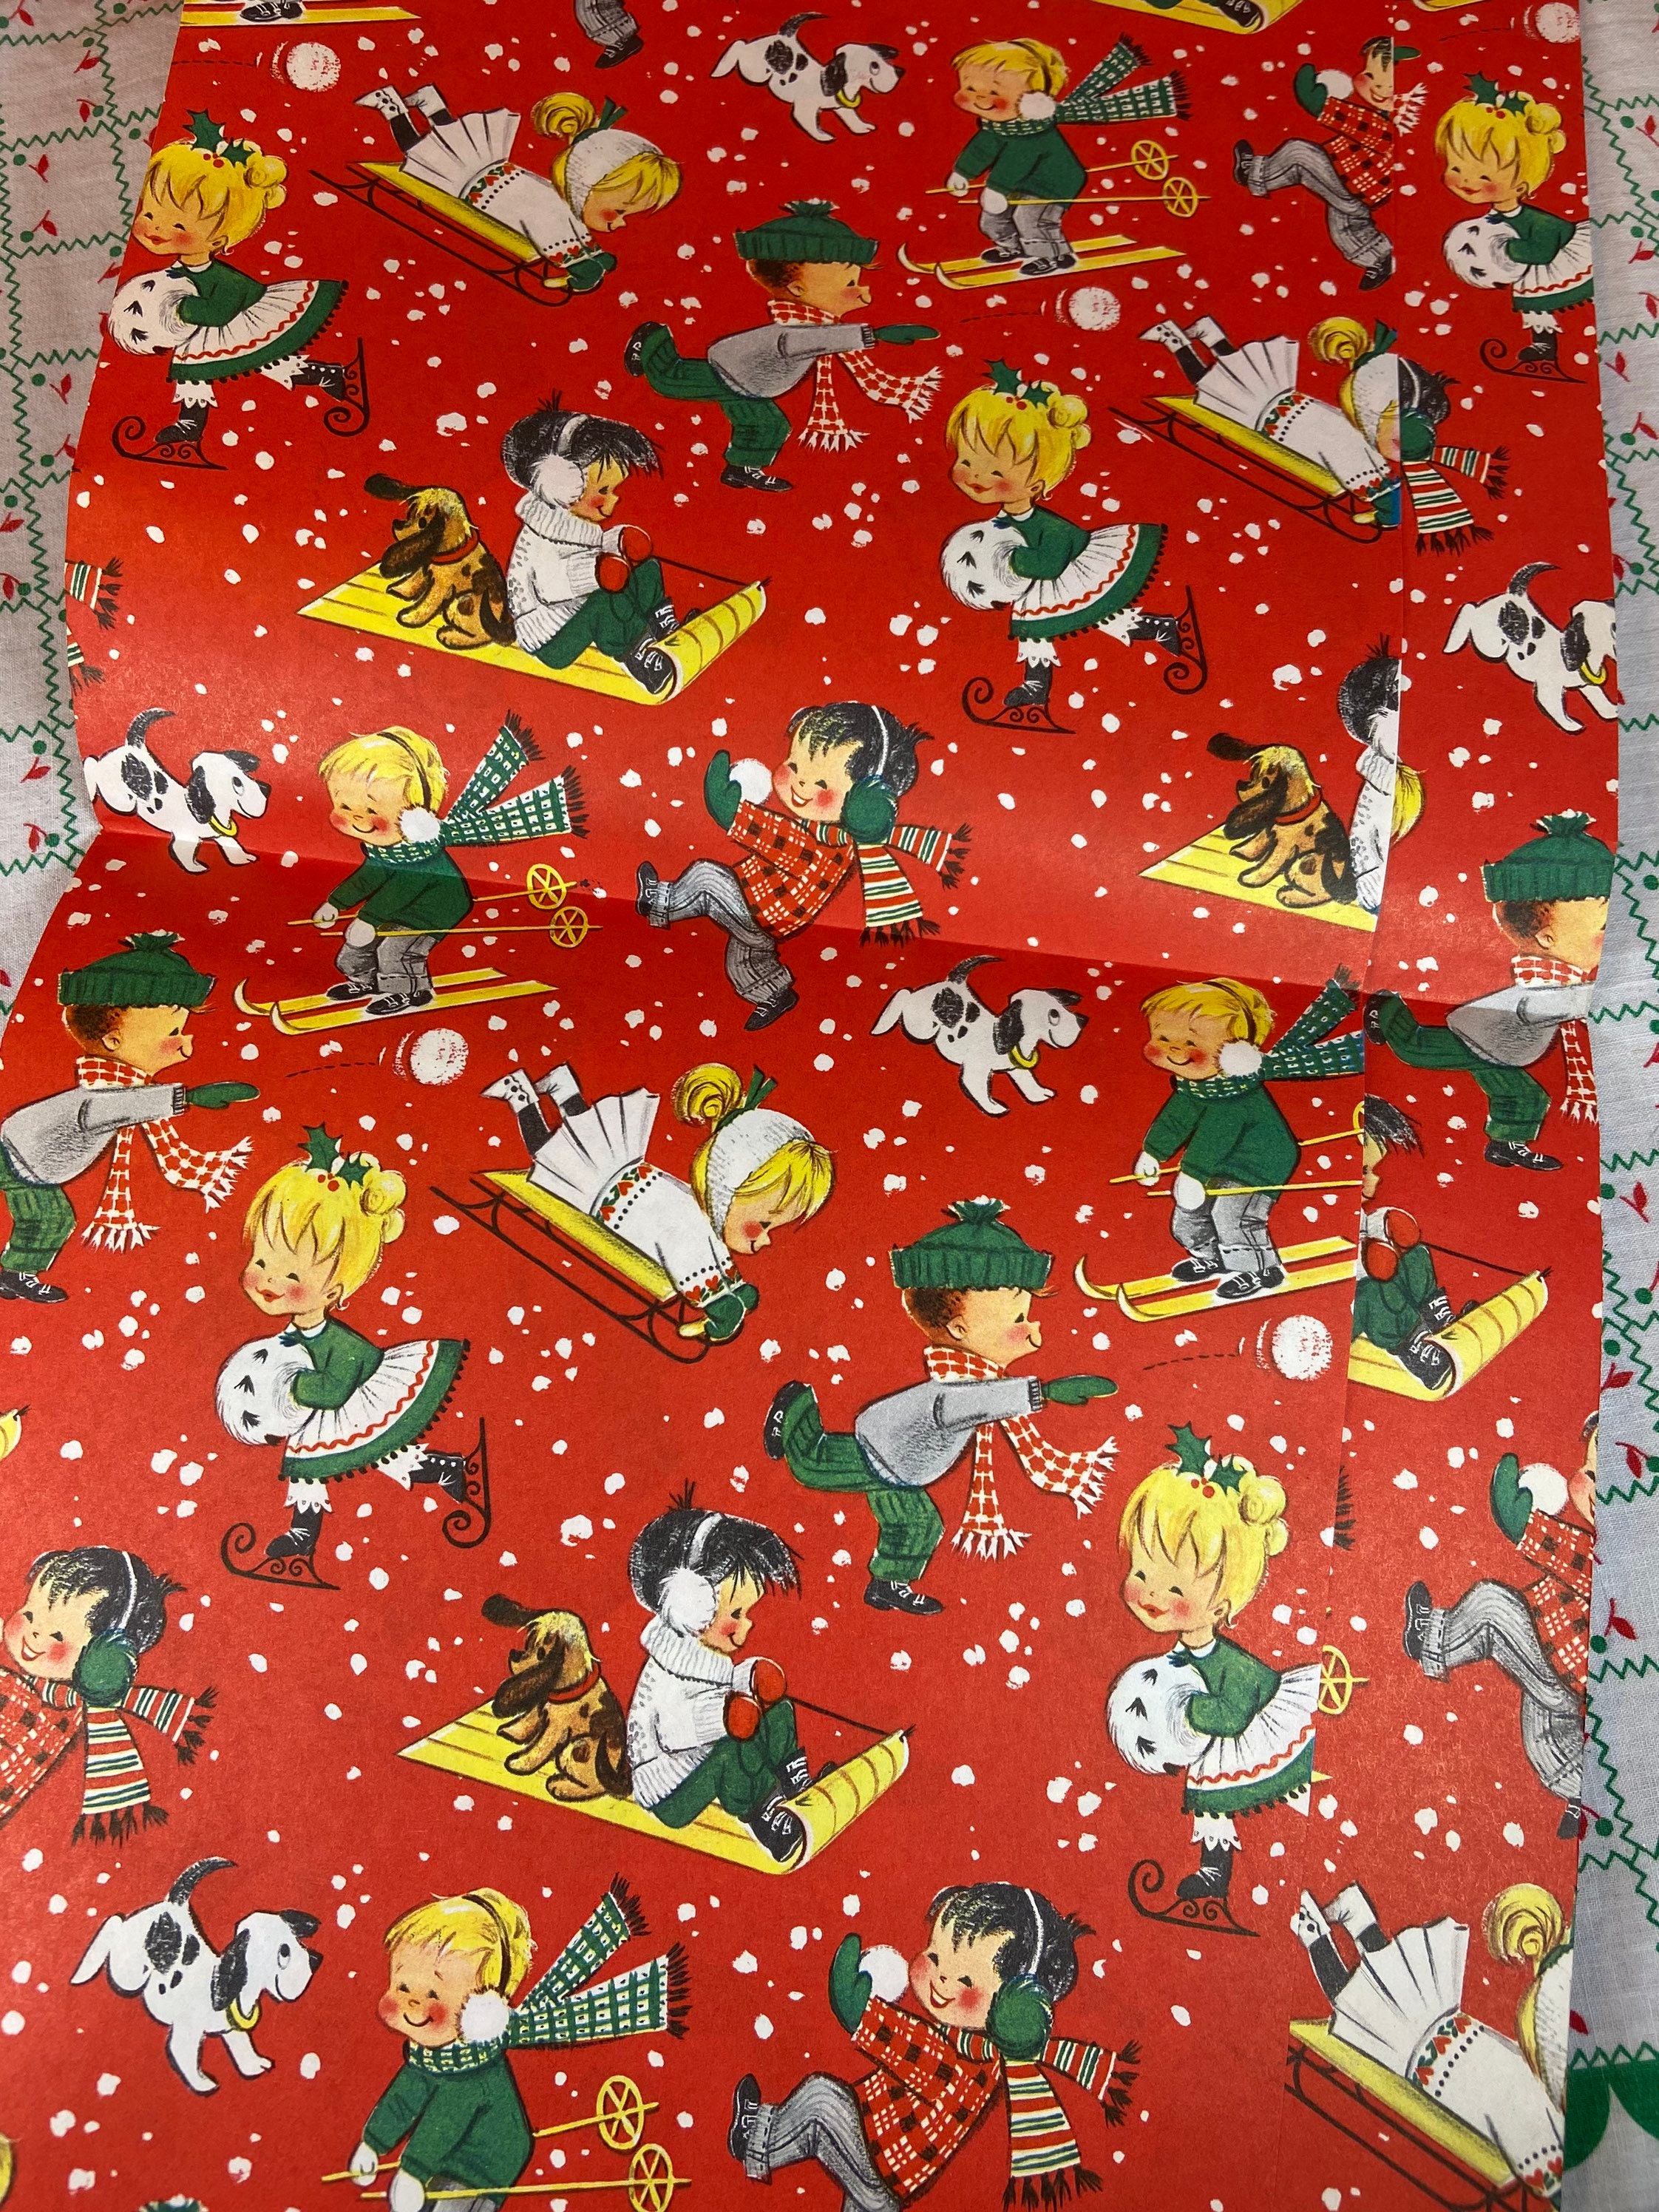 LDSTENT Vintage Christmas Wrapping Paper - Festive Gift Wrap for A Nostalgic Touch